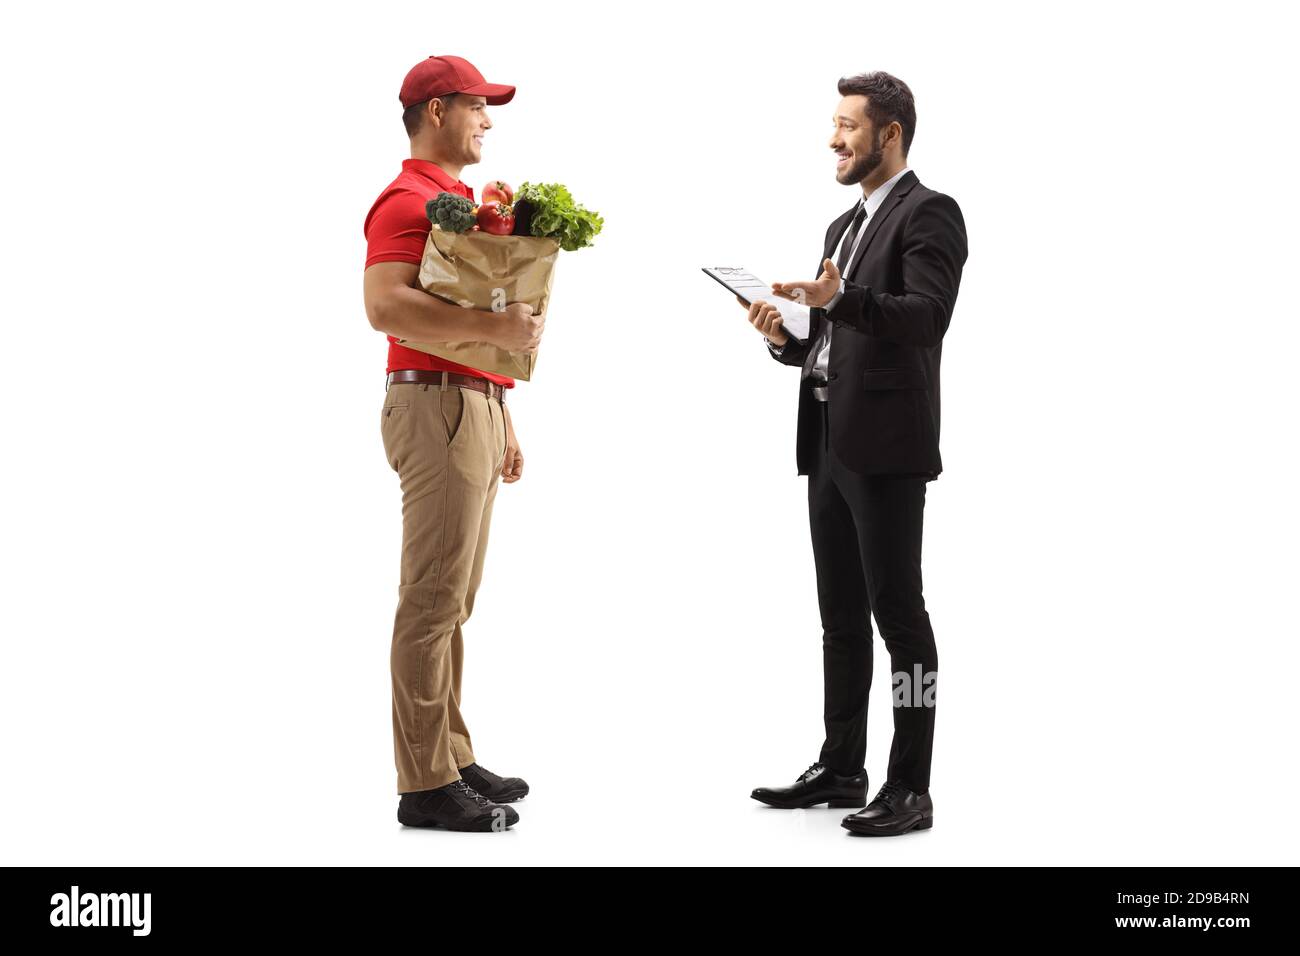 Full length profile shot of a manager talking to a food delivery courier isolated on white background Stock Photo